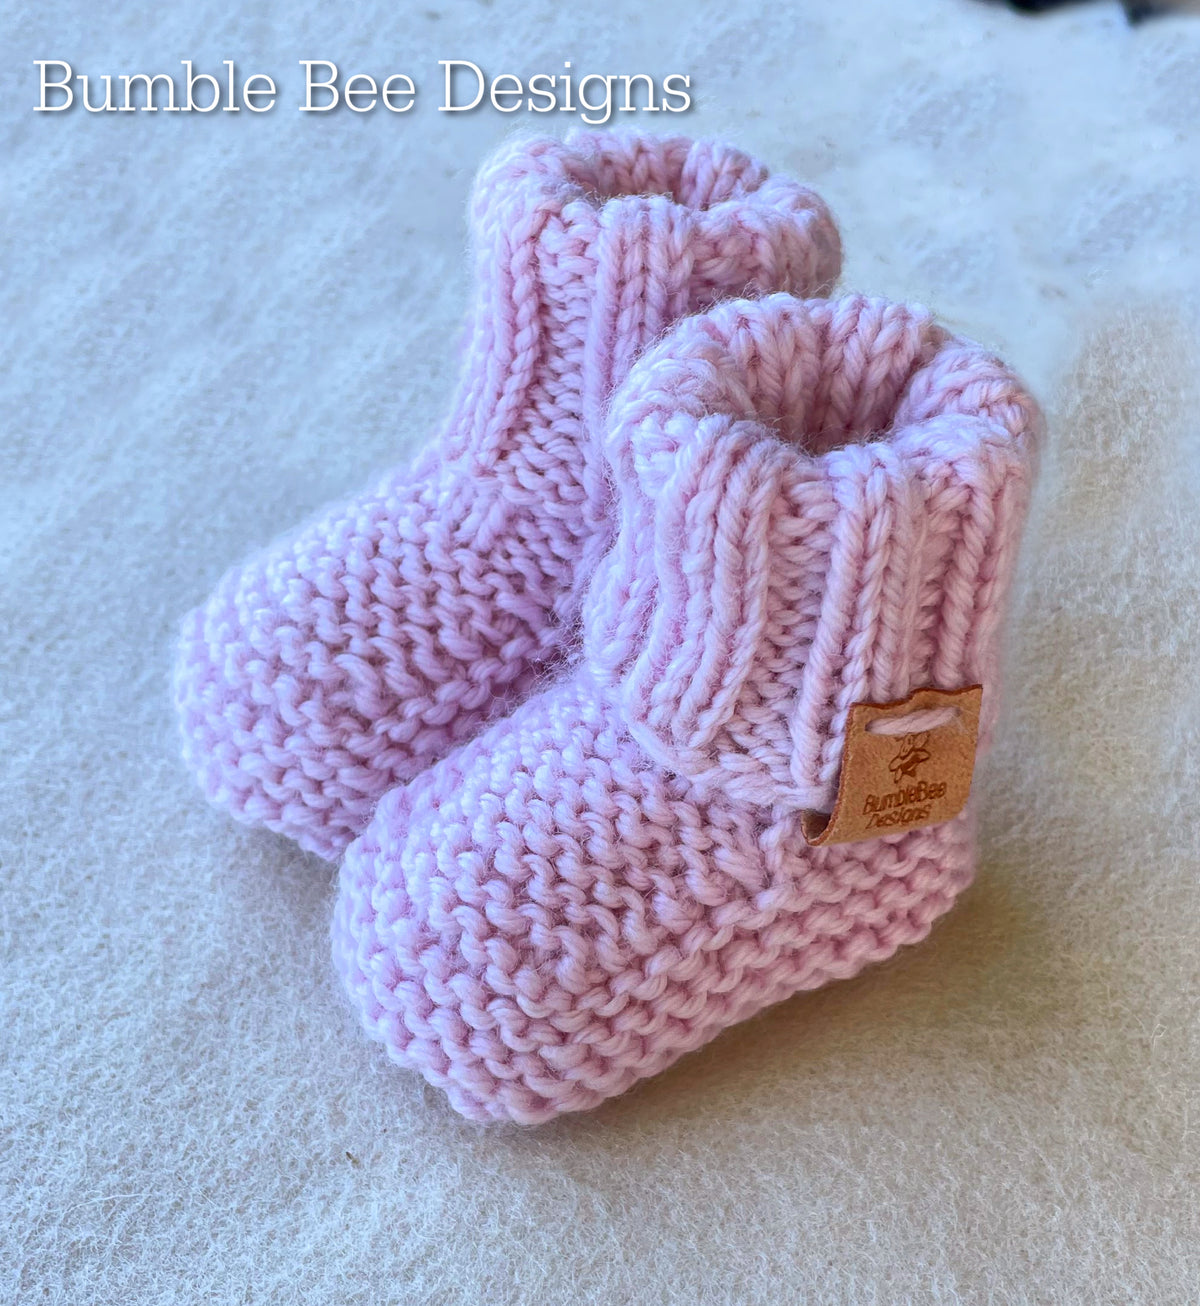 Hand Knitted Top Knot Hat and Matching Booties, Pastel Pink, Sizes 0-12 months